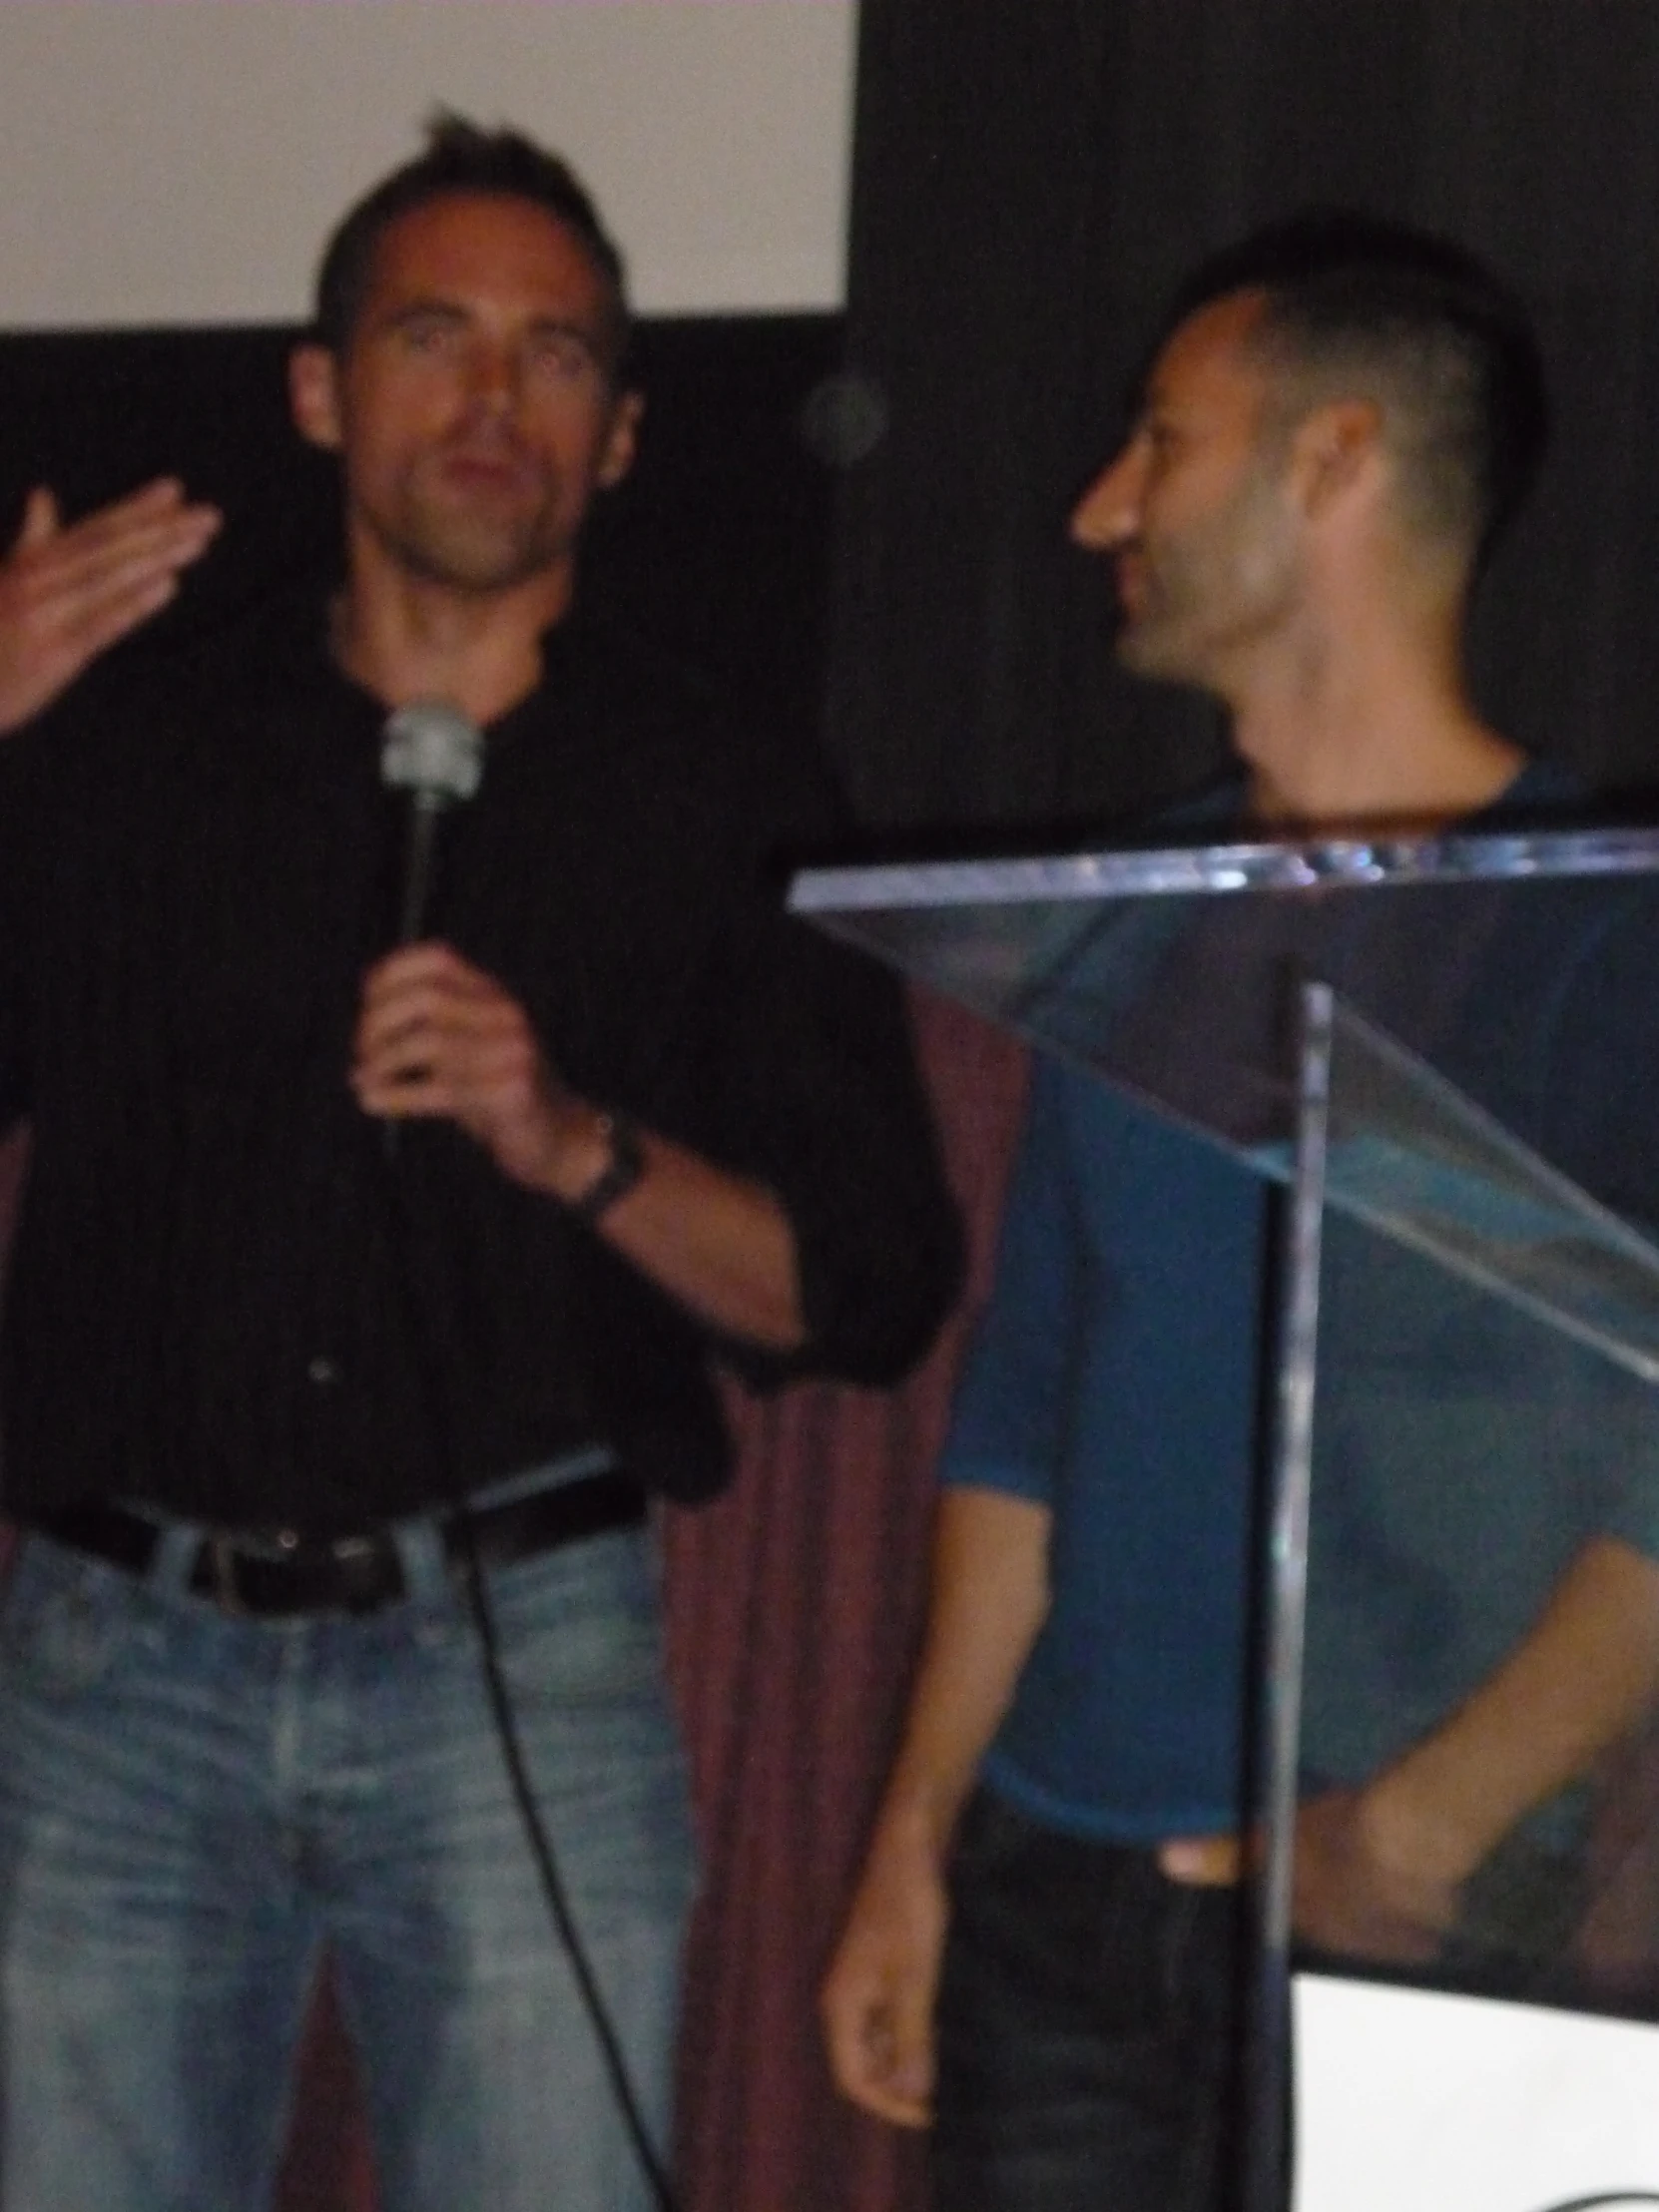 two men with microphones in front of a screen